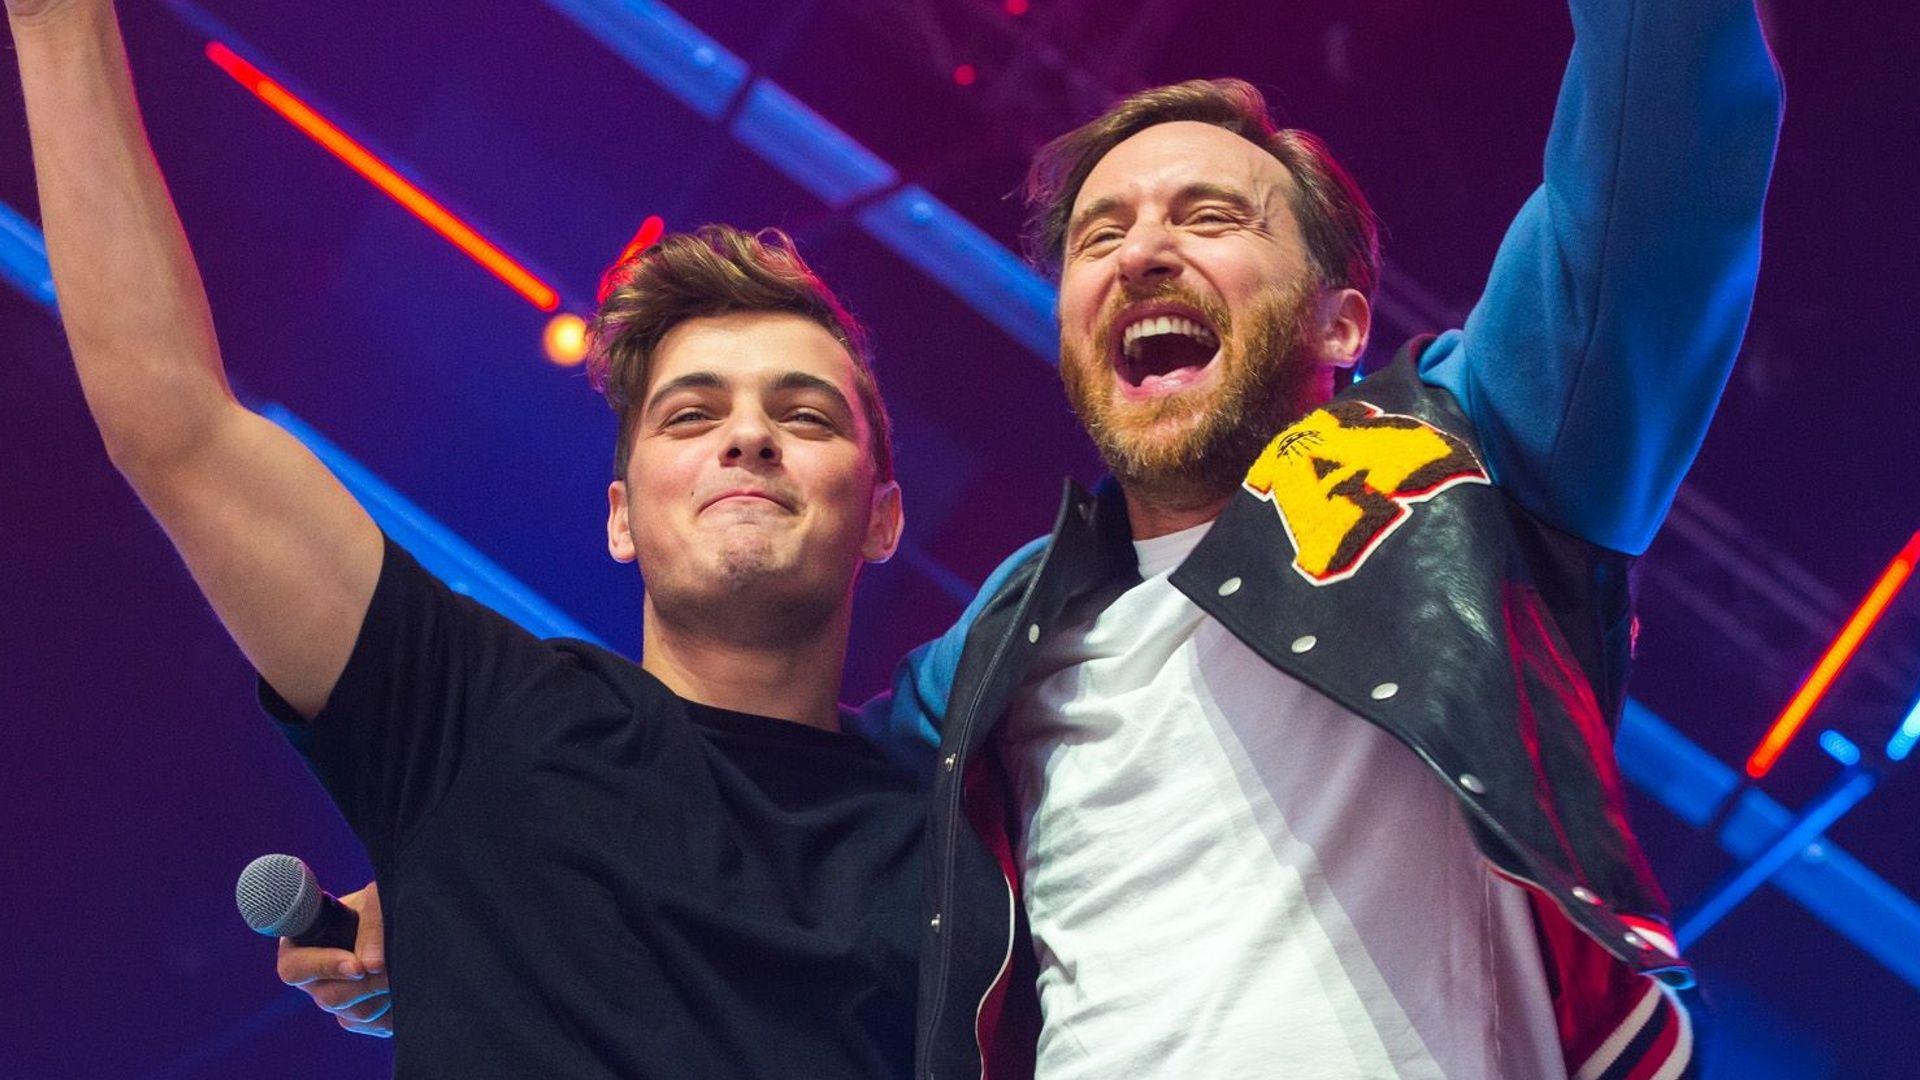 Martin Garrix is working on another collaboration with David Guetta